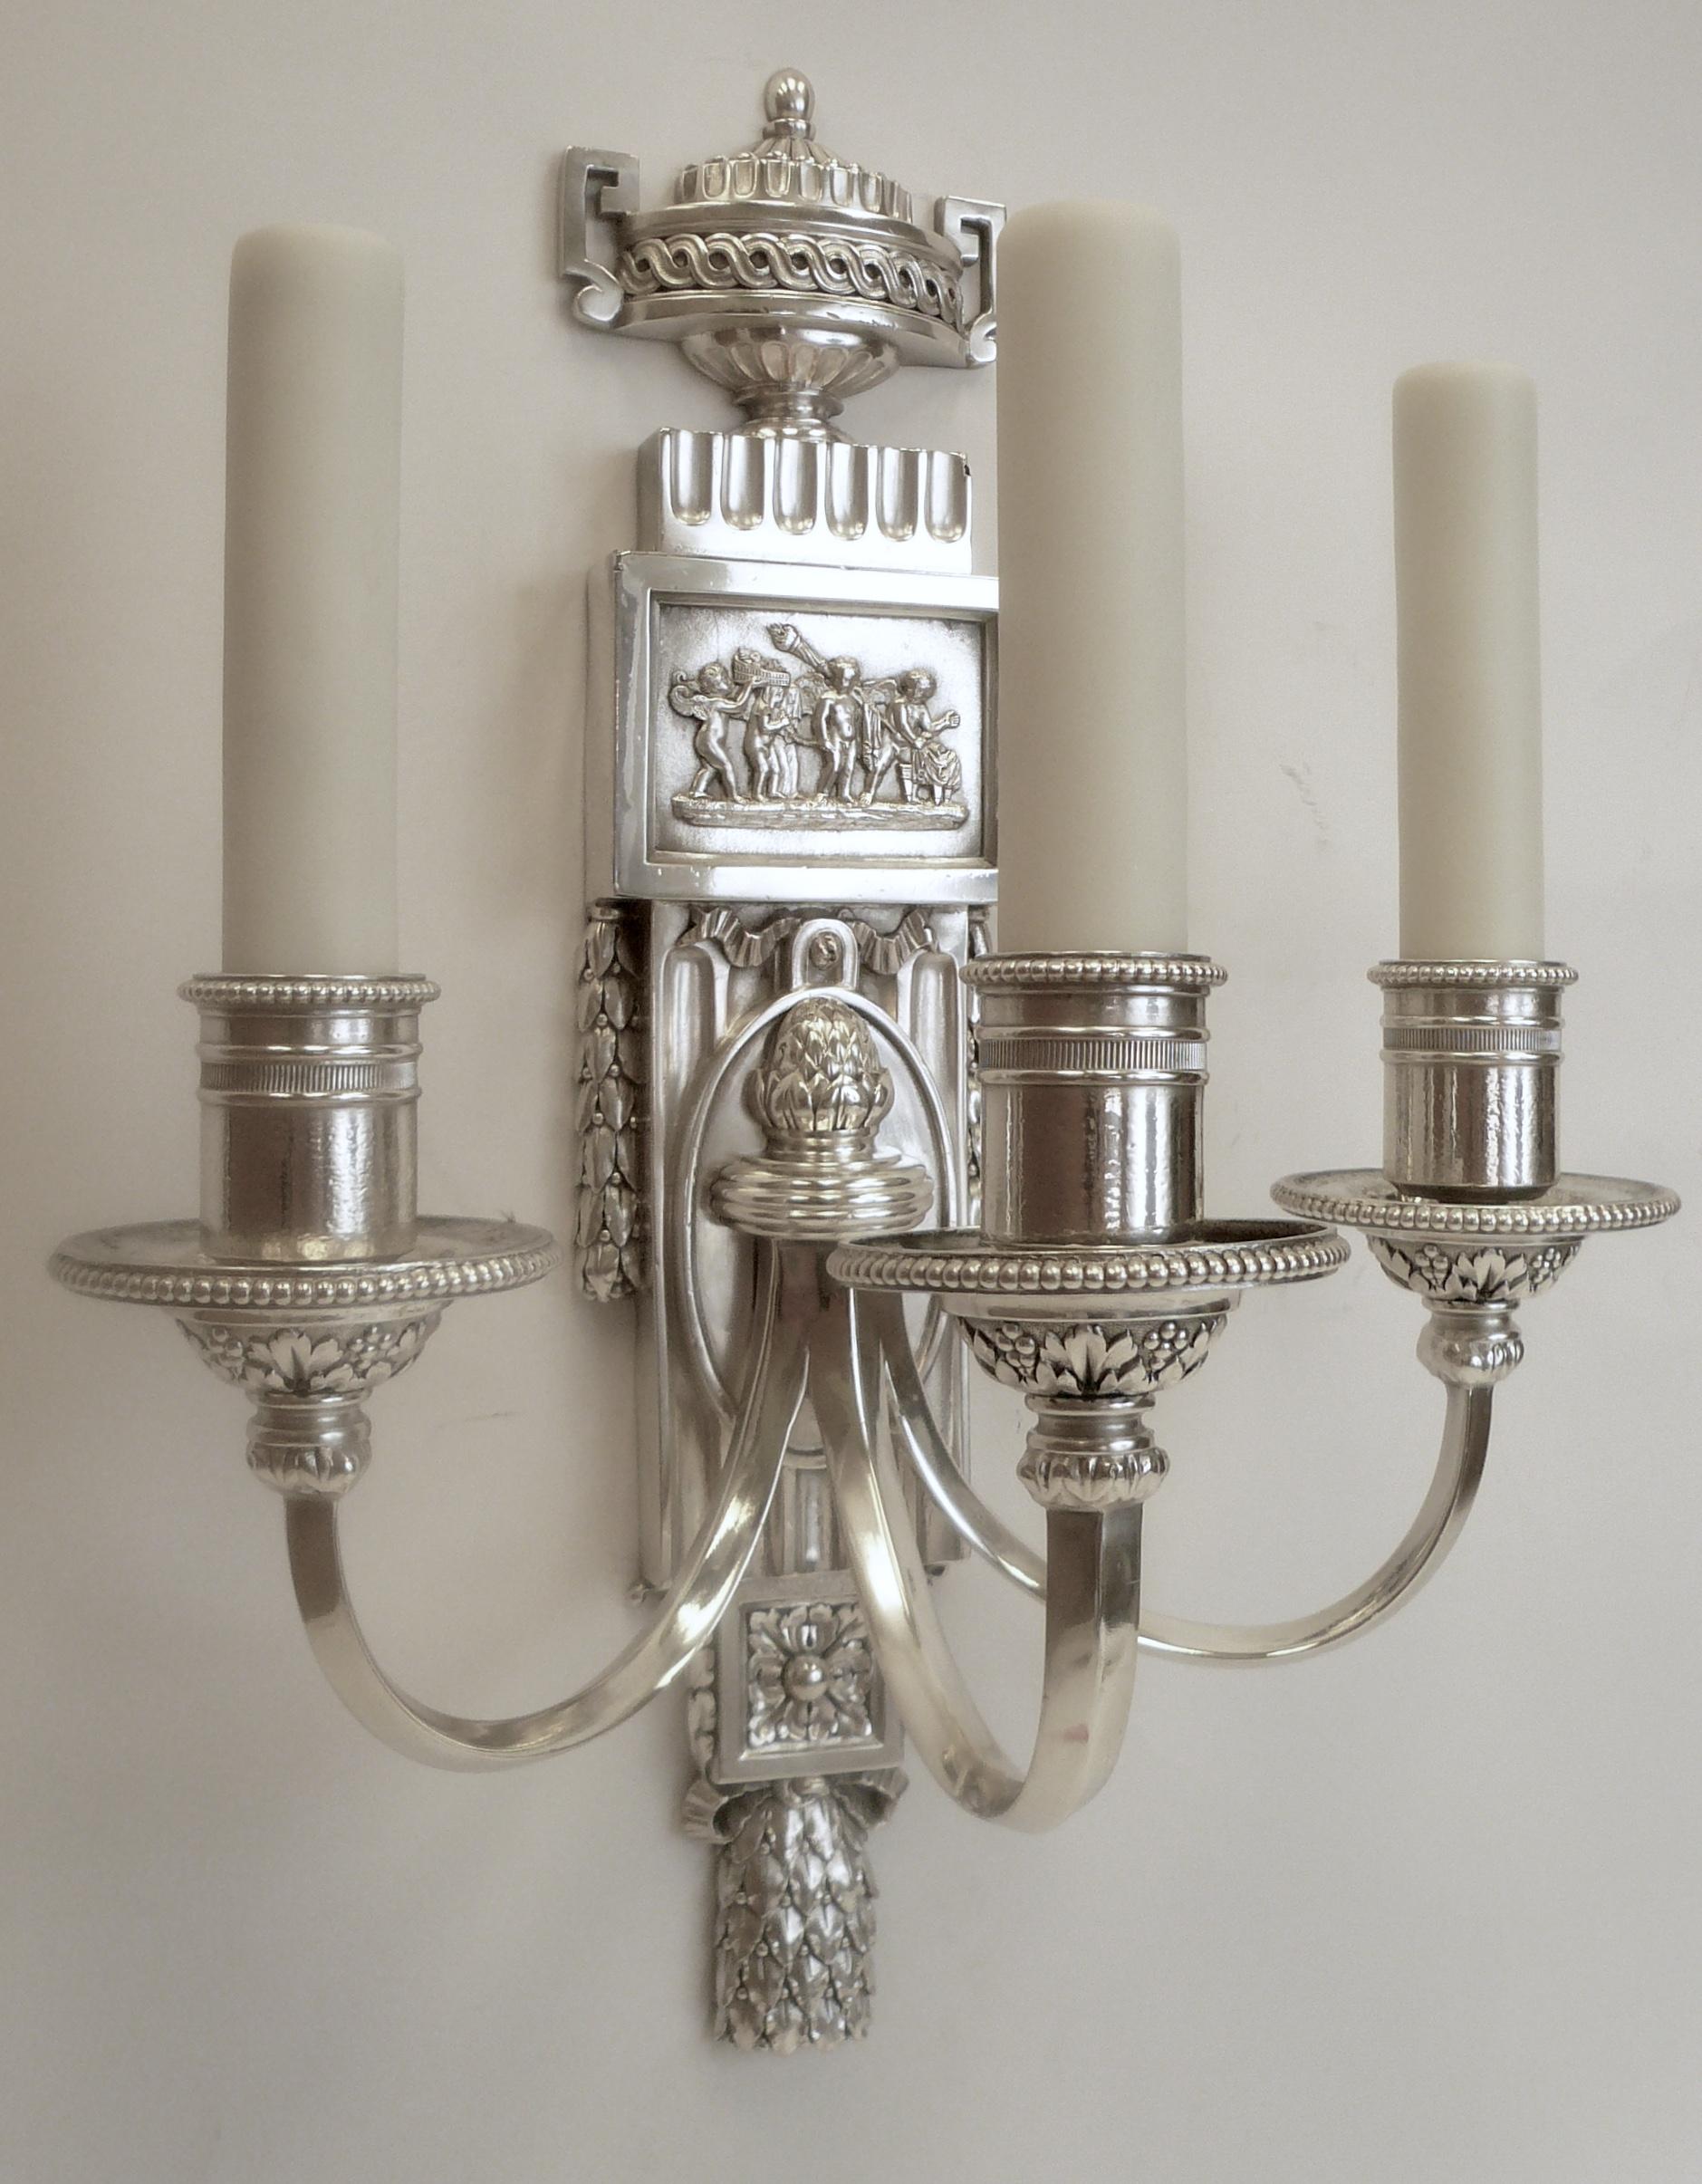 These handsome Caldwell sconces feature neoclassical motifs including acanthus and laurel leaves, urns and swags, and Robert Adam style plaques with mythological scenes.